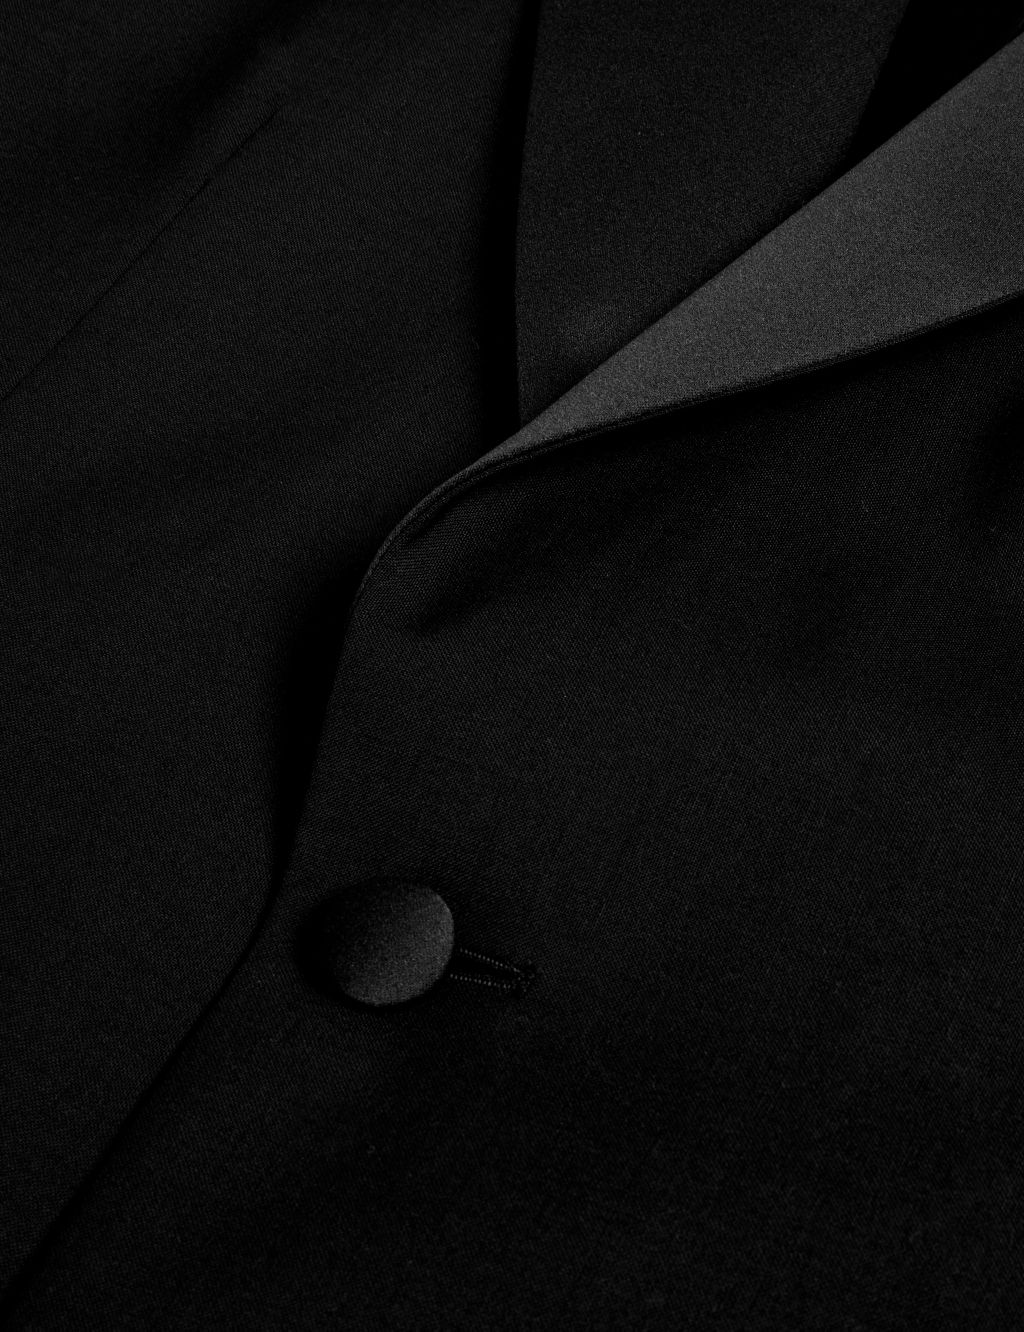 Tailored Fit Pure Wool Tuxedo Jacket image 2